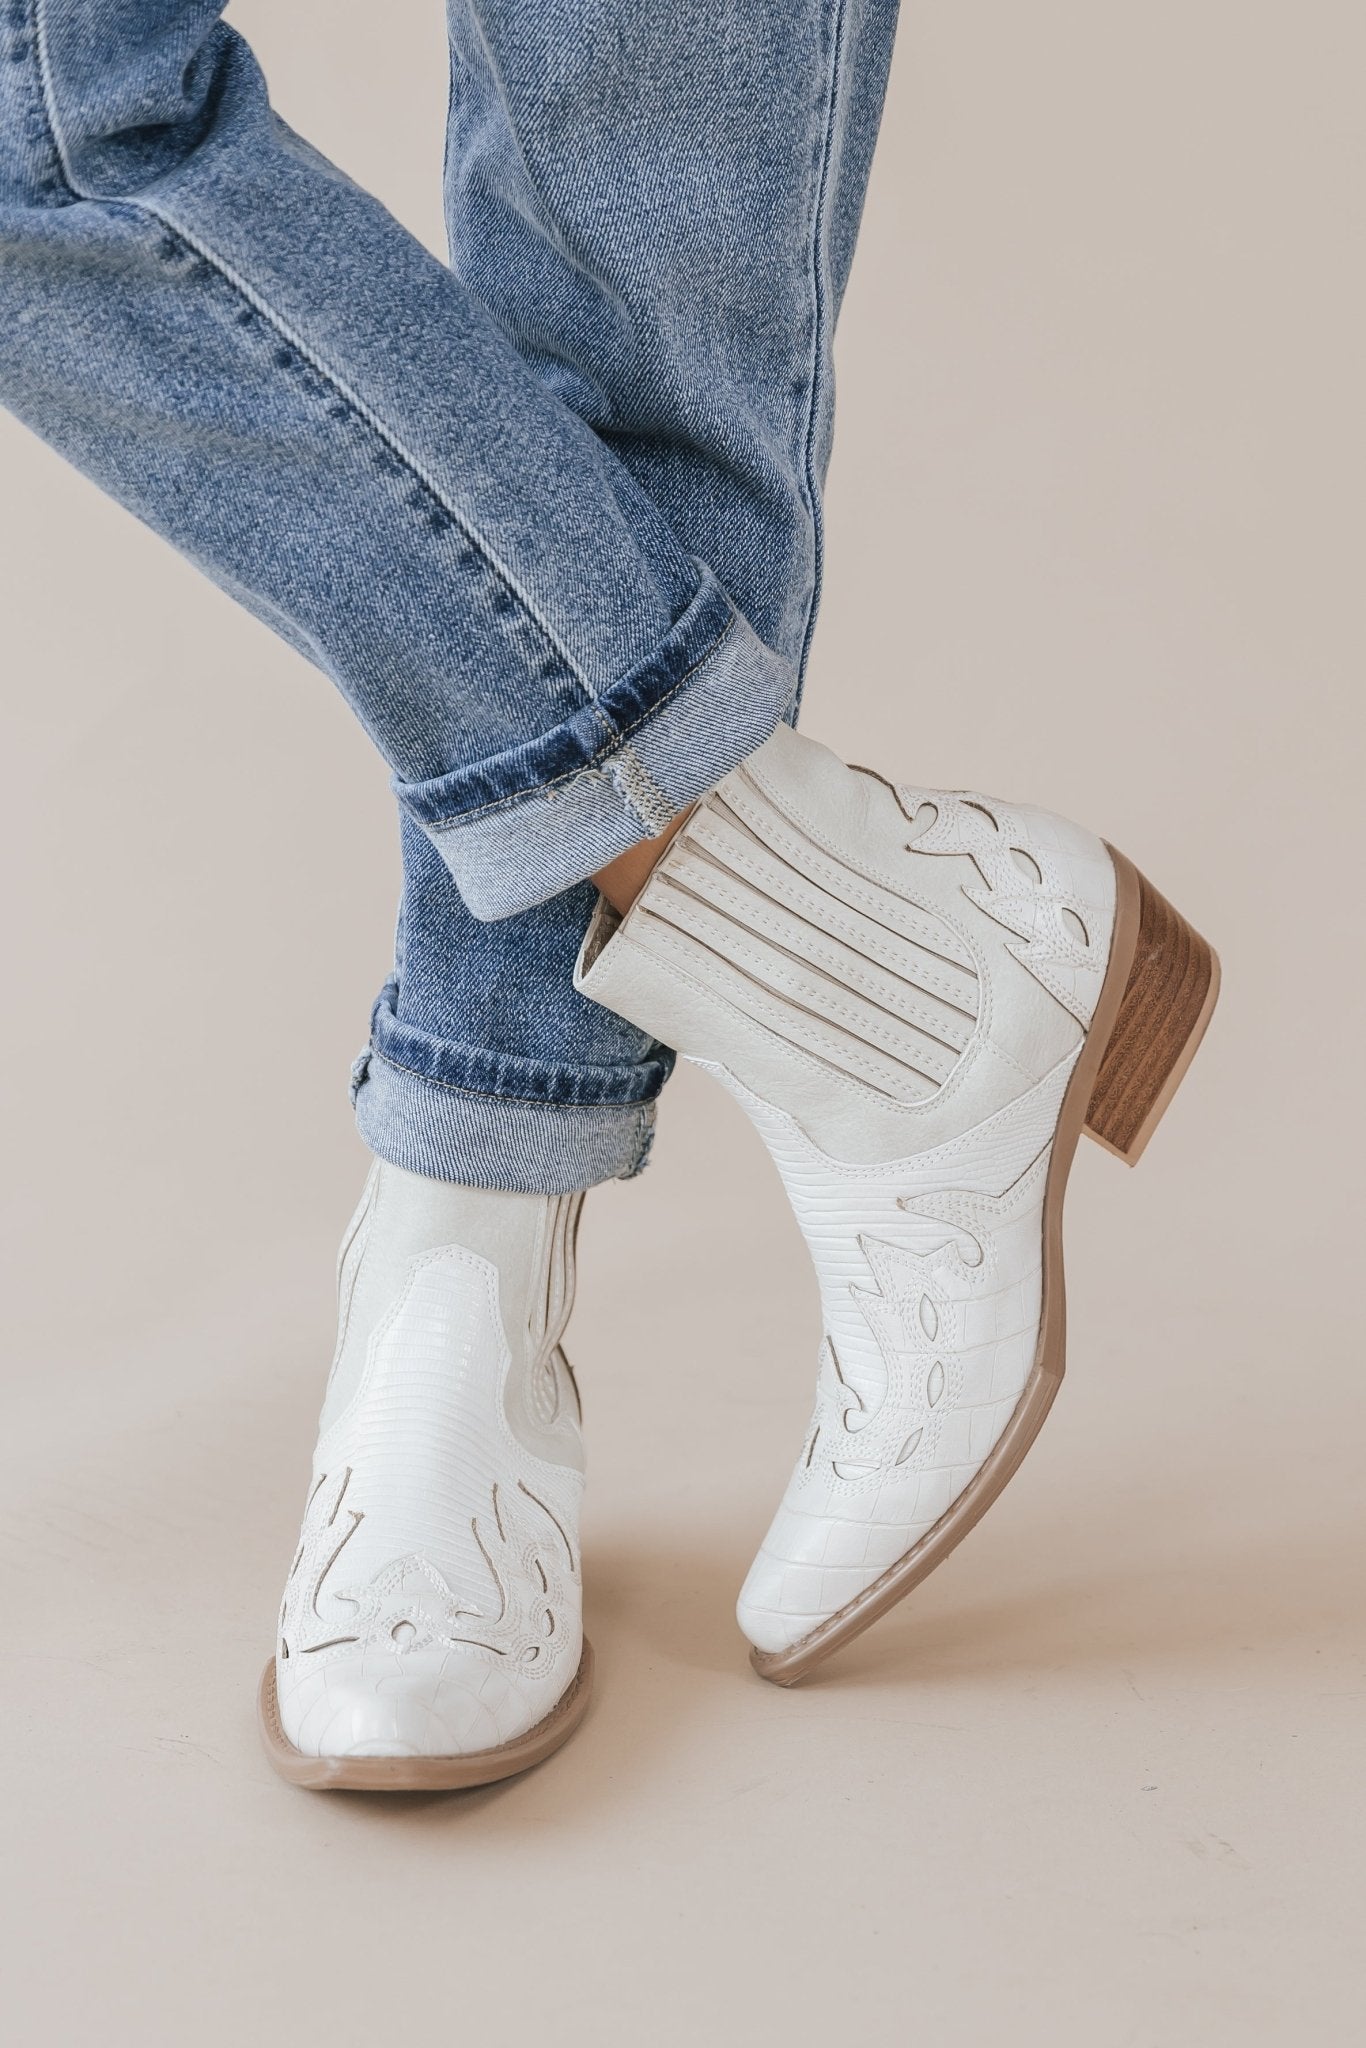 Coconuts By Matisse Milo Ivory Western Booties - Magnolia Boutique